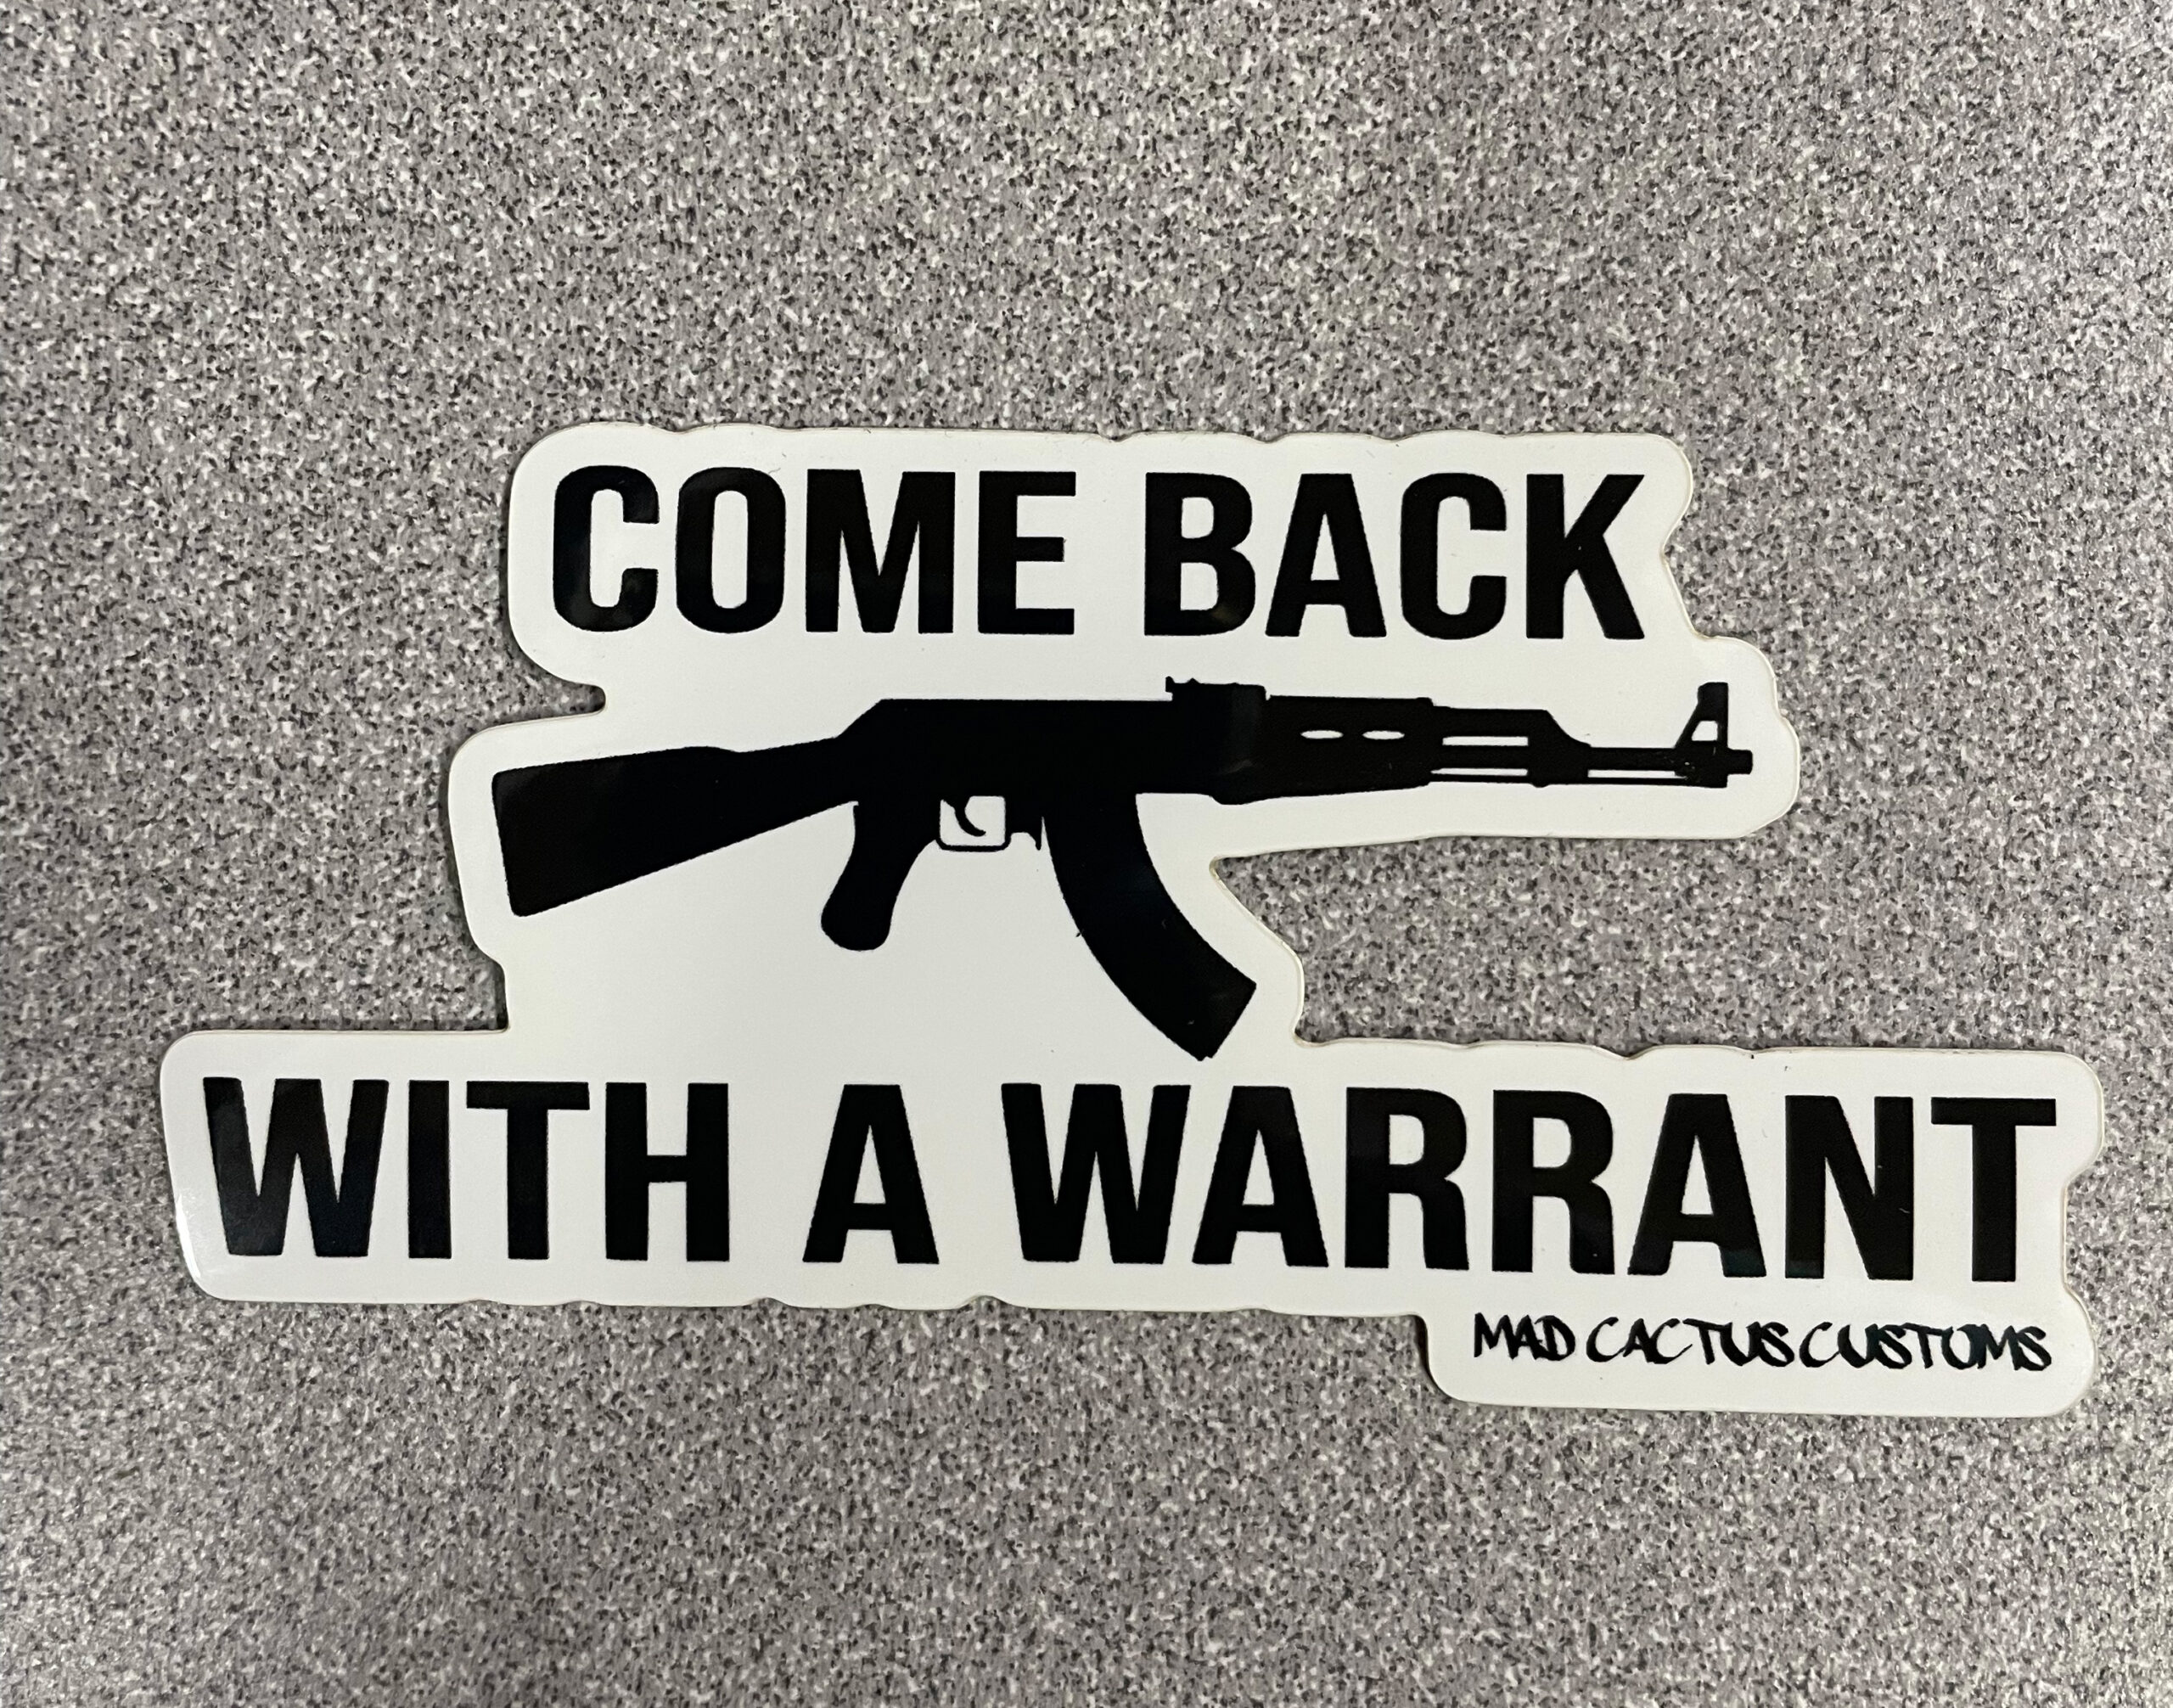 Come back with a warrant sticker